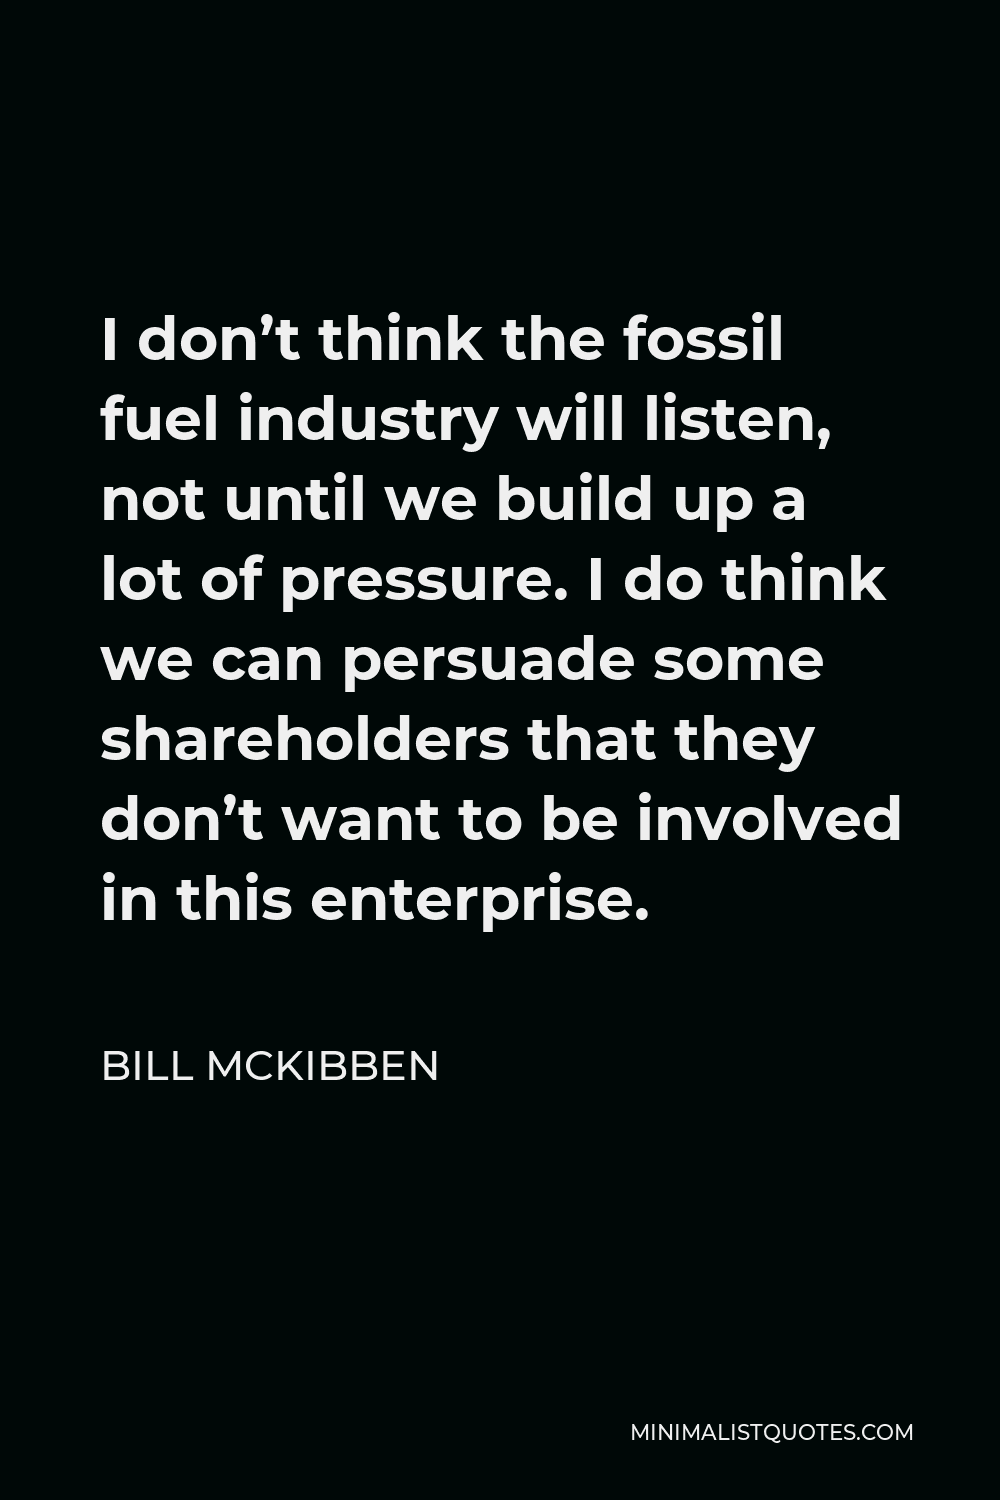 Bill McKibben Quote - I don’t think the fossil fuel industry will listen, not until we build up a lot of pressure. I do think we can persuade some shareholders that they don’t want to be involved in this enterprise.